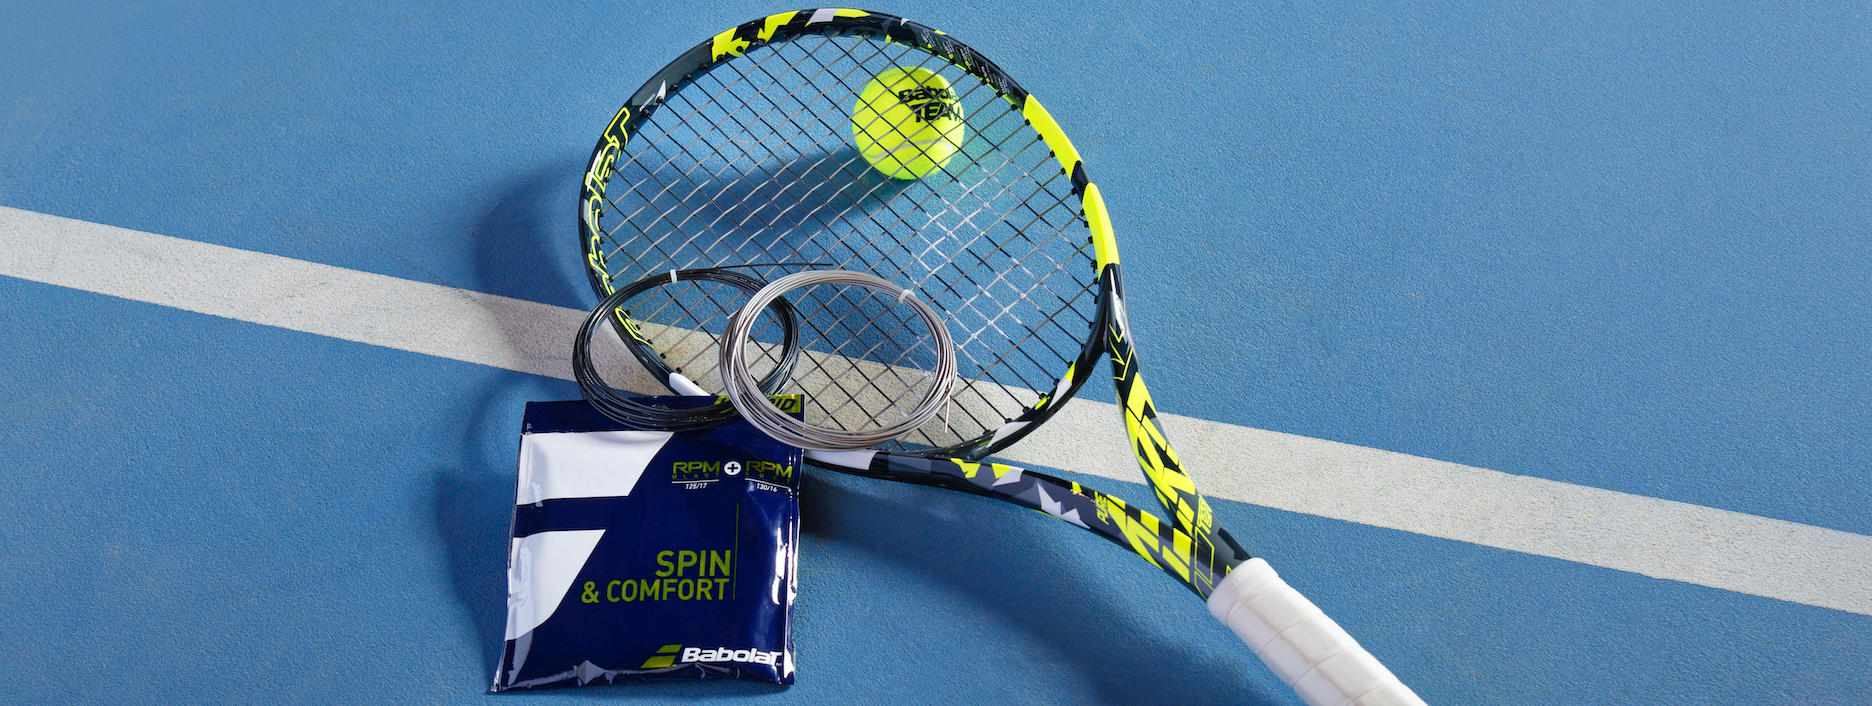 A review on Babolat RPM Blast string by Racquet Point